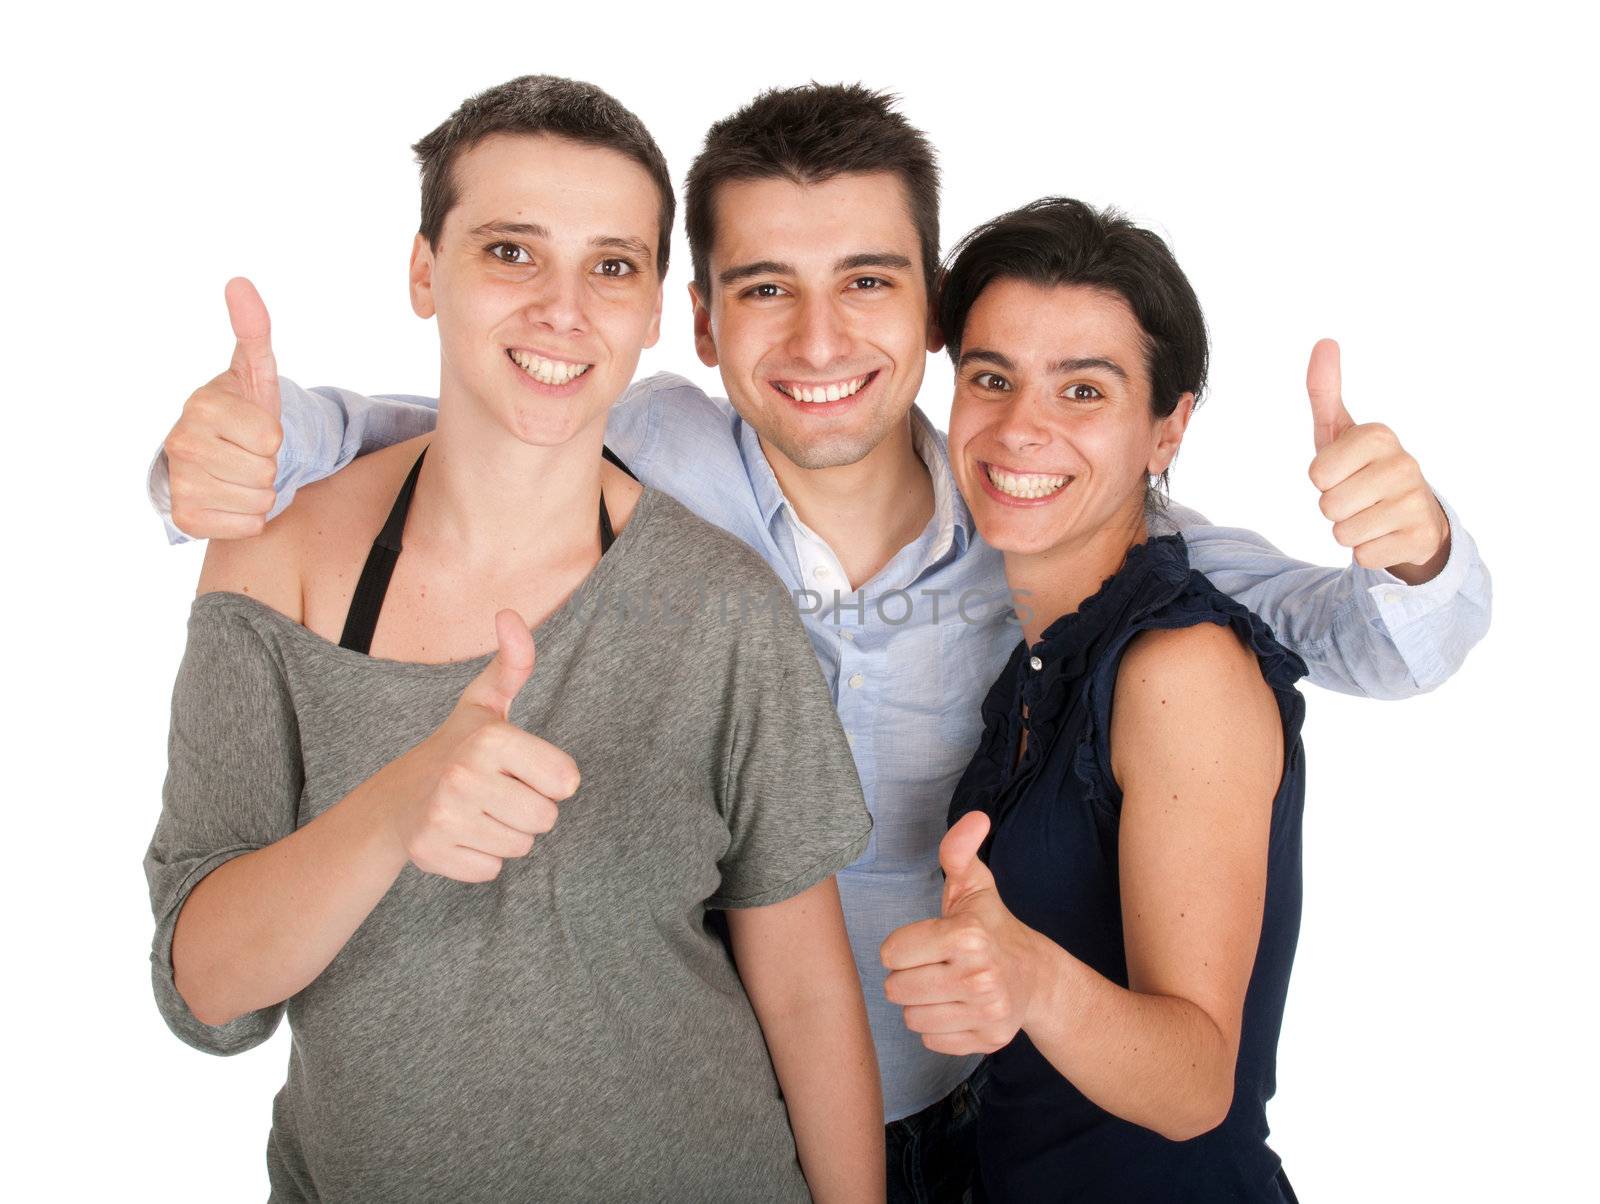 happy smiling brother and sisters showing thumbs up sign (isolated on white background)